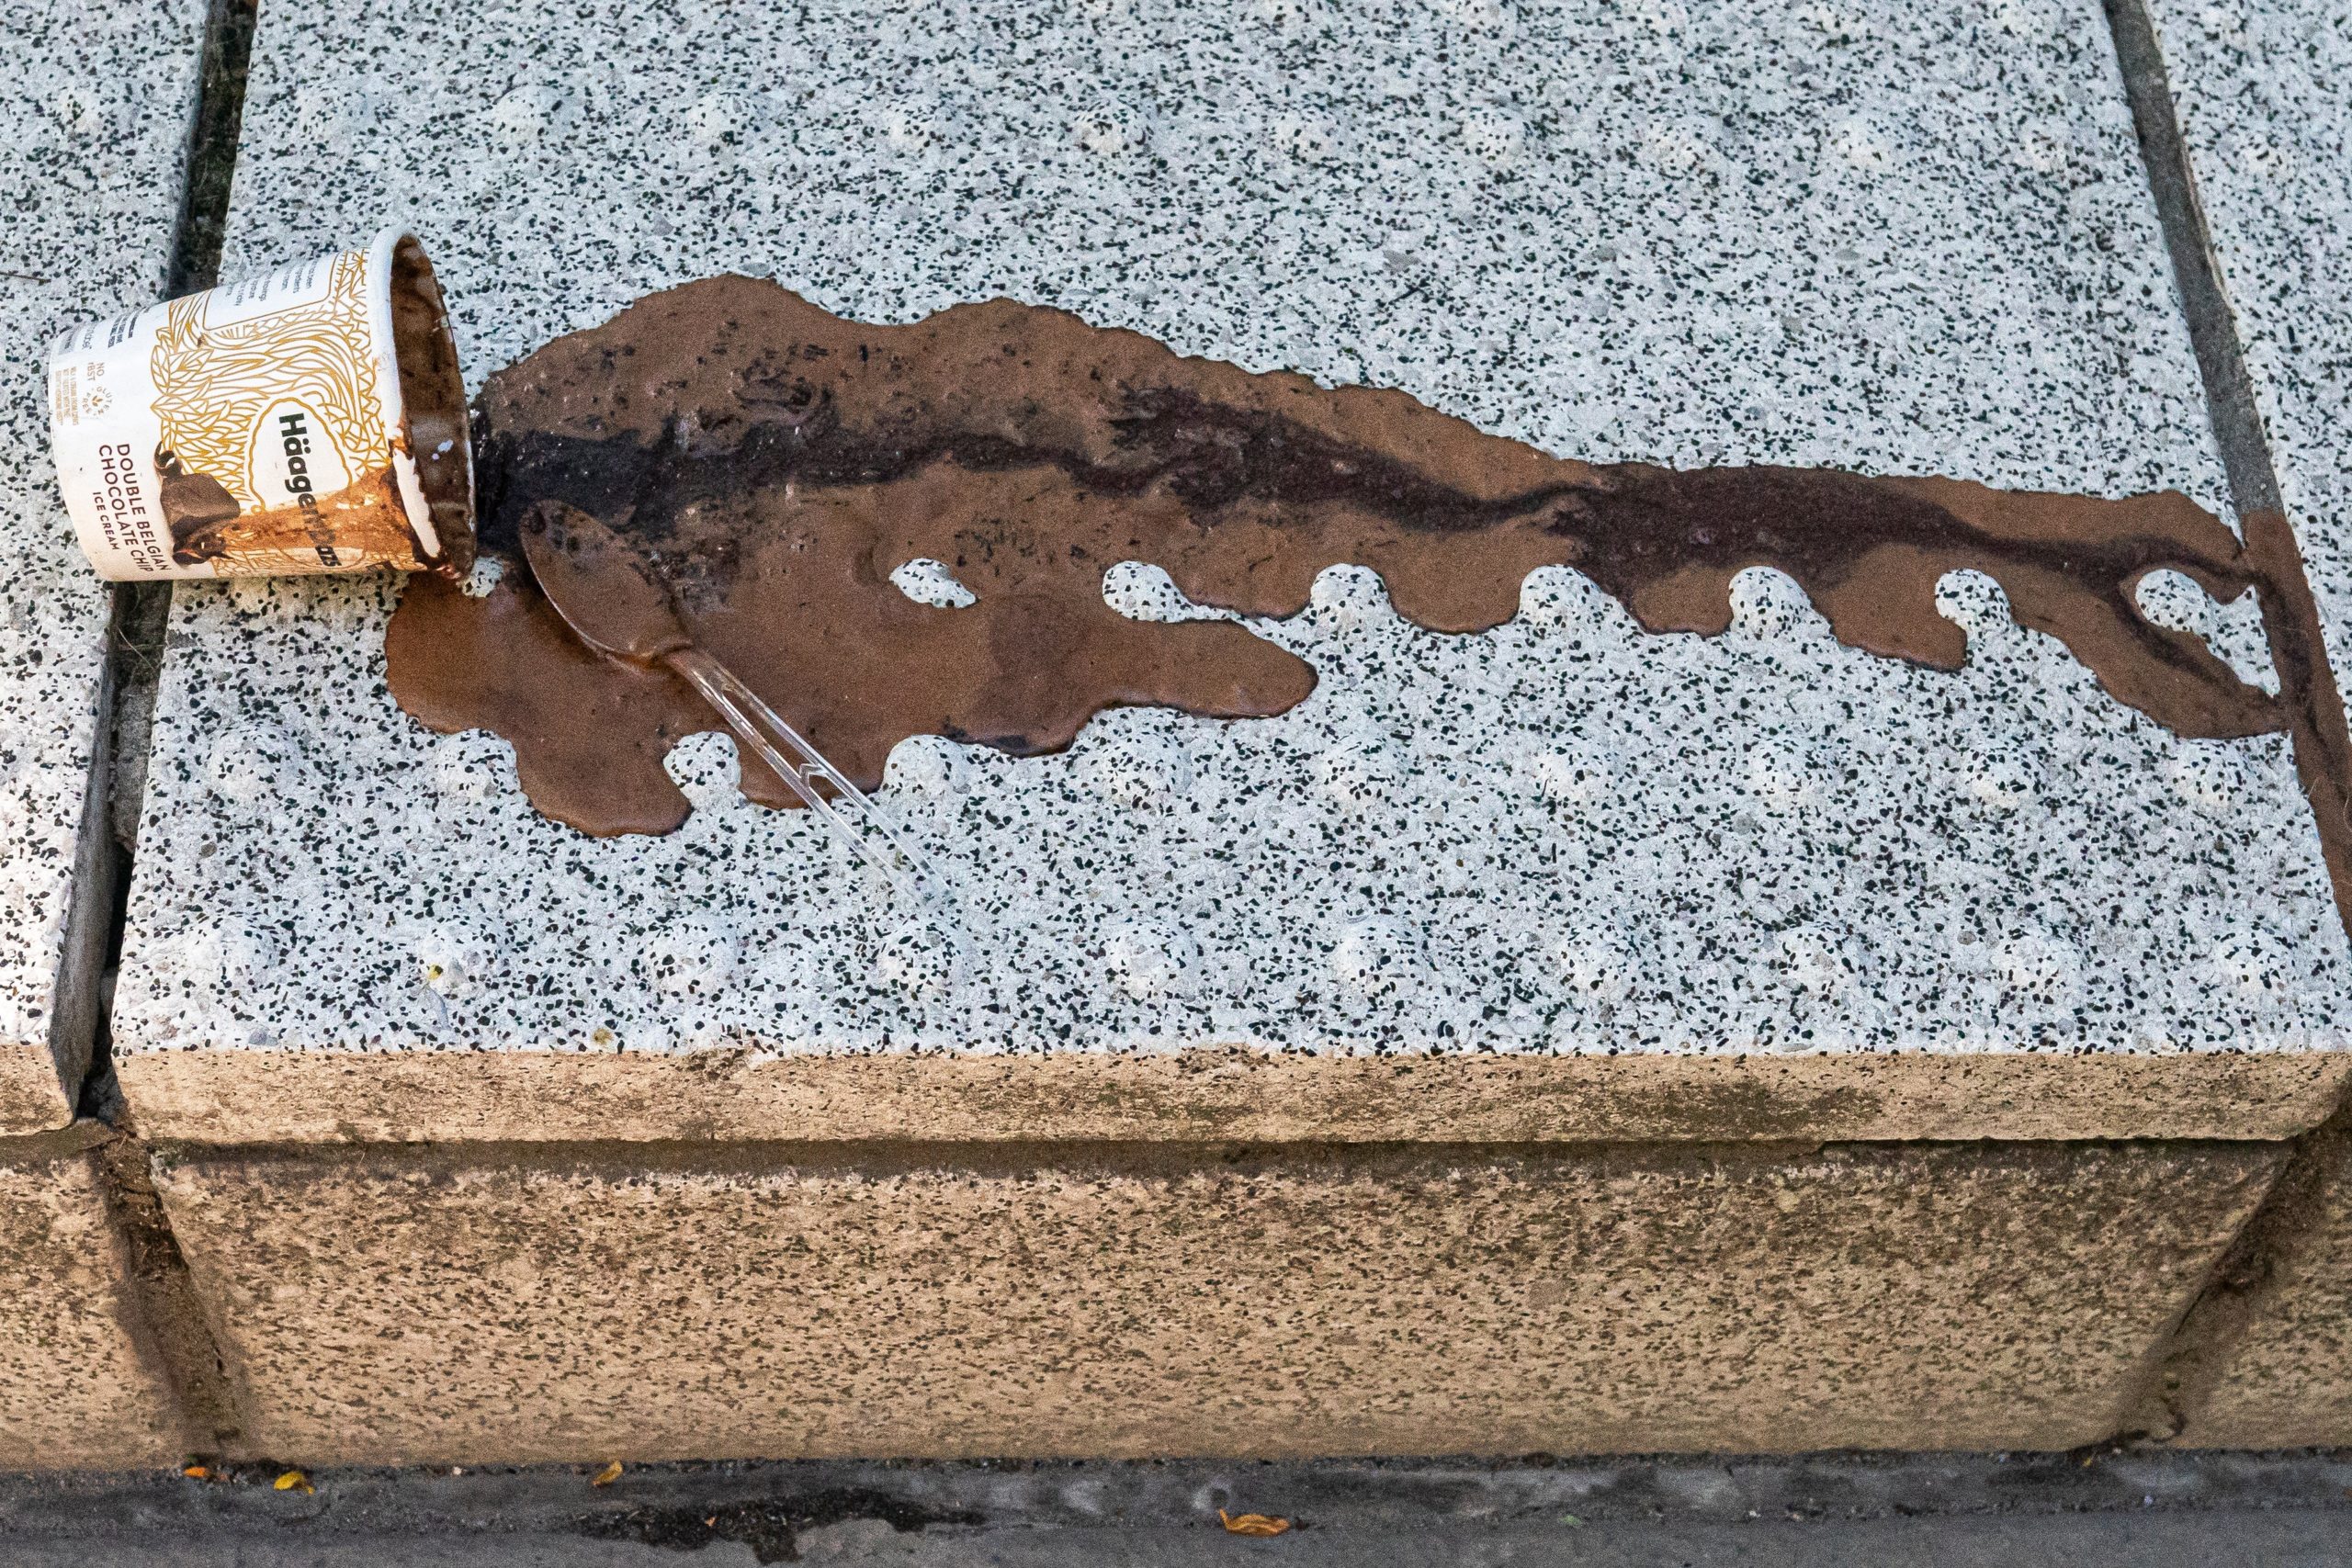 An abandoned and melted pint of ice cream drys along a city street on June 27, 2021 in Portland, Oregon.  (Photo: Nathan Howard, Getty Images)